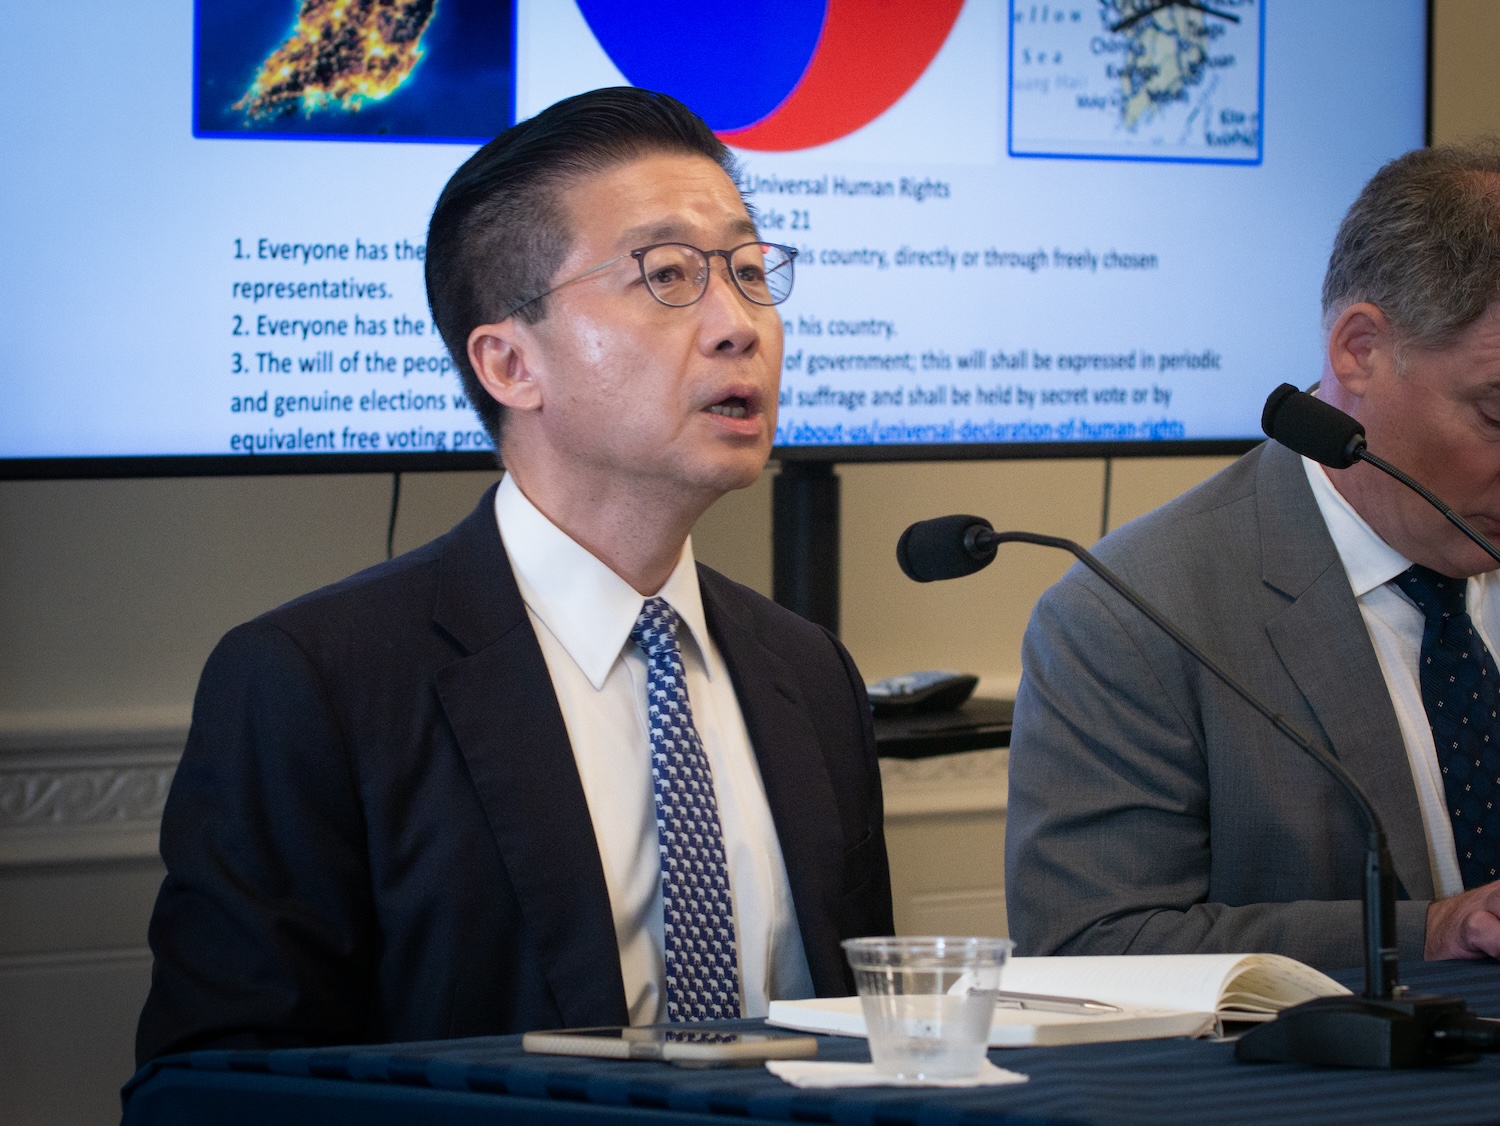 A man in a dark suit and polka dot tie speaks at an International Forum, seated next to another man in a gray suit. A presentation slide with text and images about One Korea is displayed in the background.